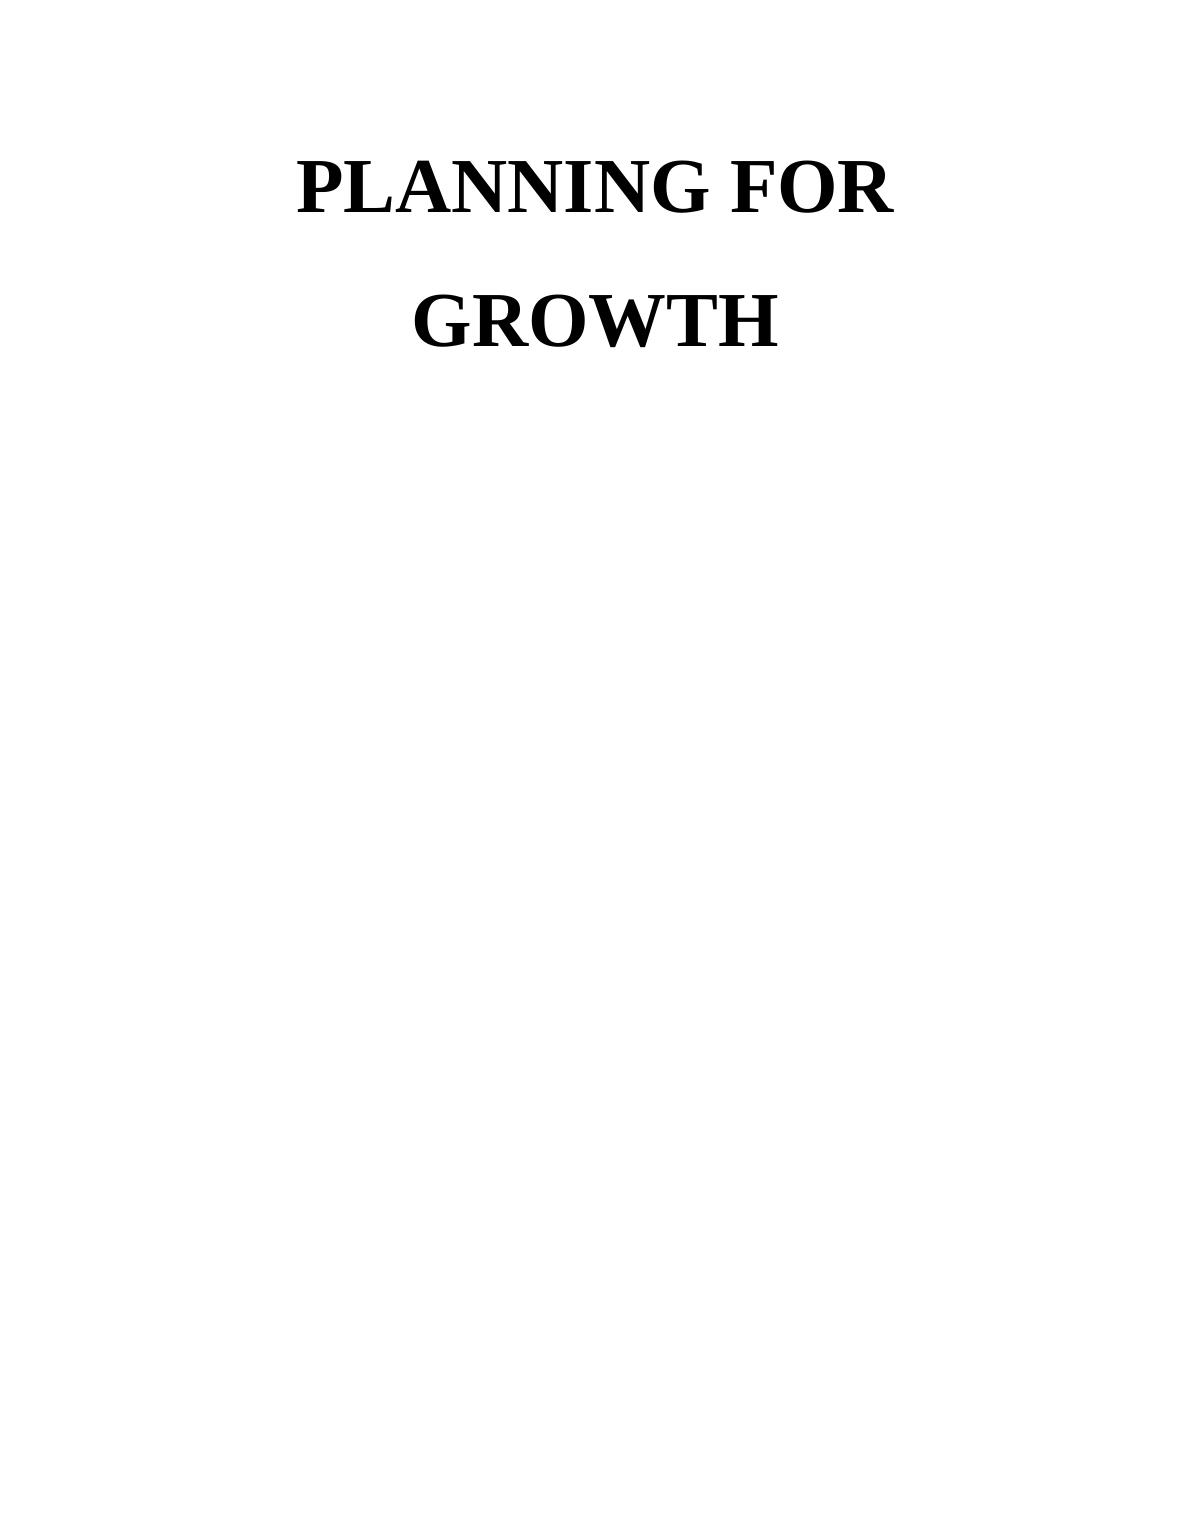 Planning for Growth Assignment - (Doc)_1